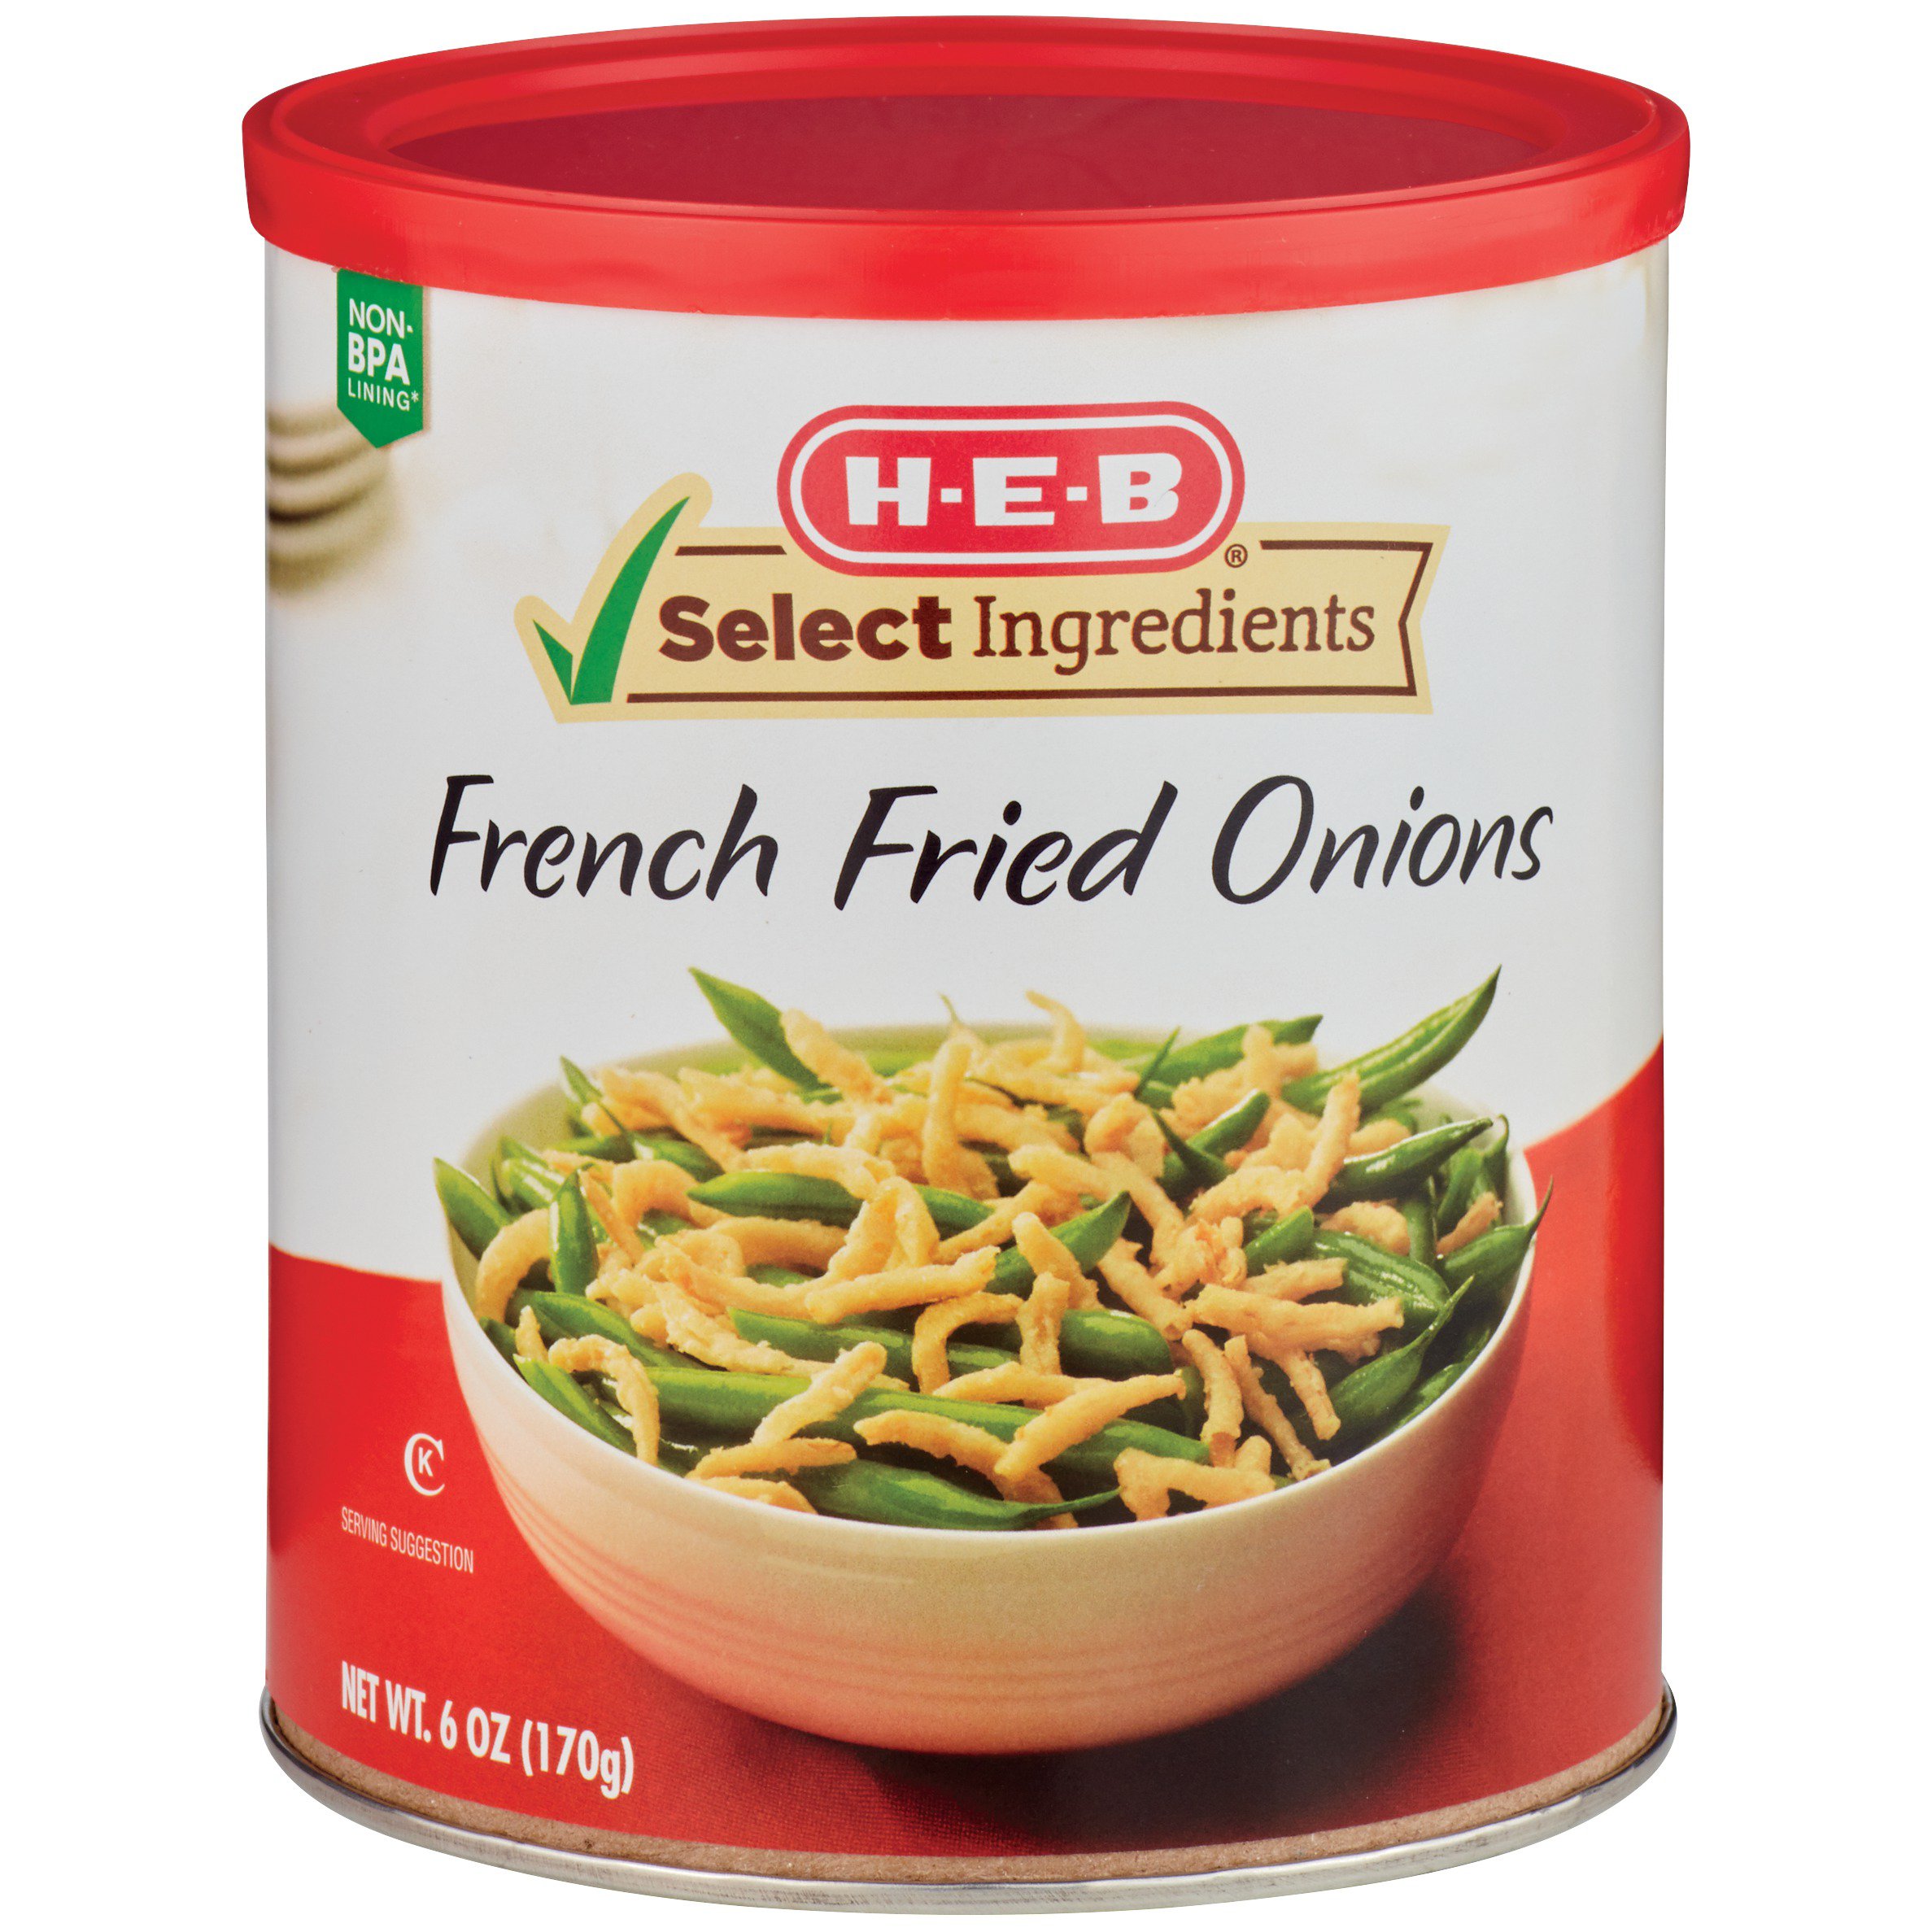 French's Original Crispy Fried Onions, 6 oz Salad Toppings 